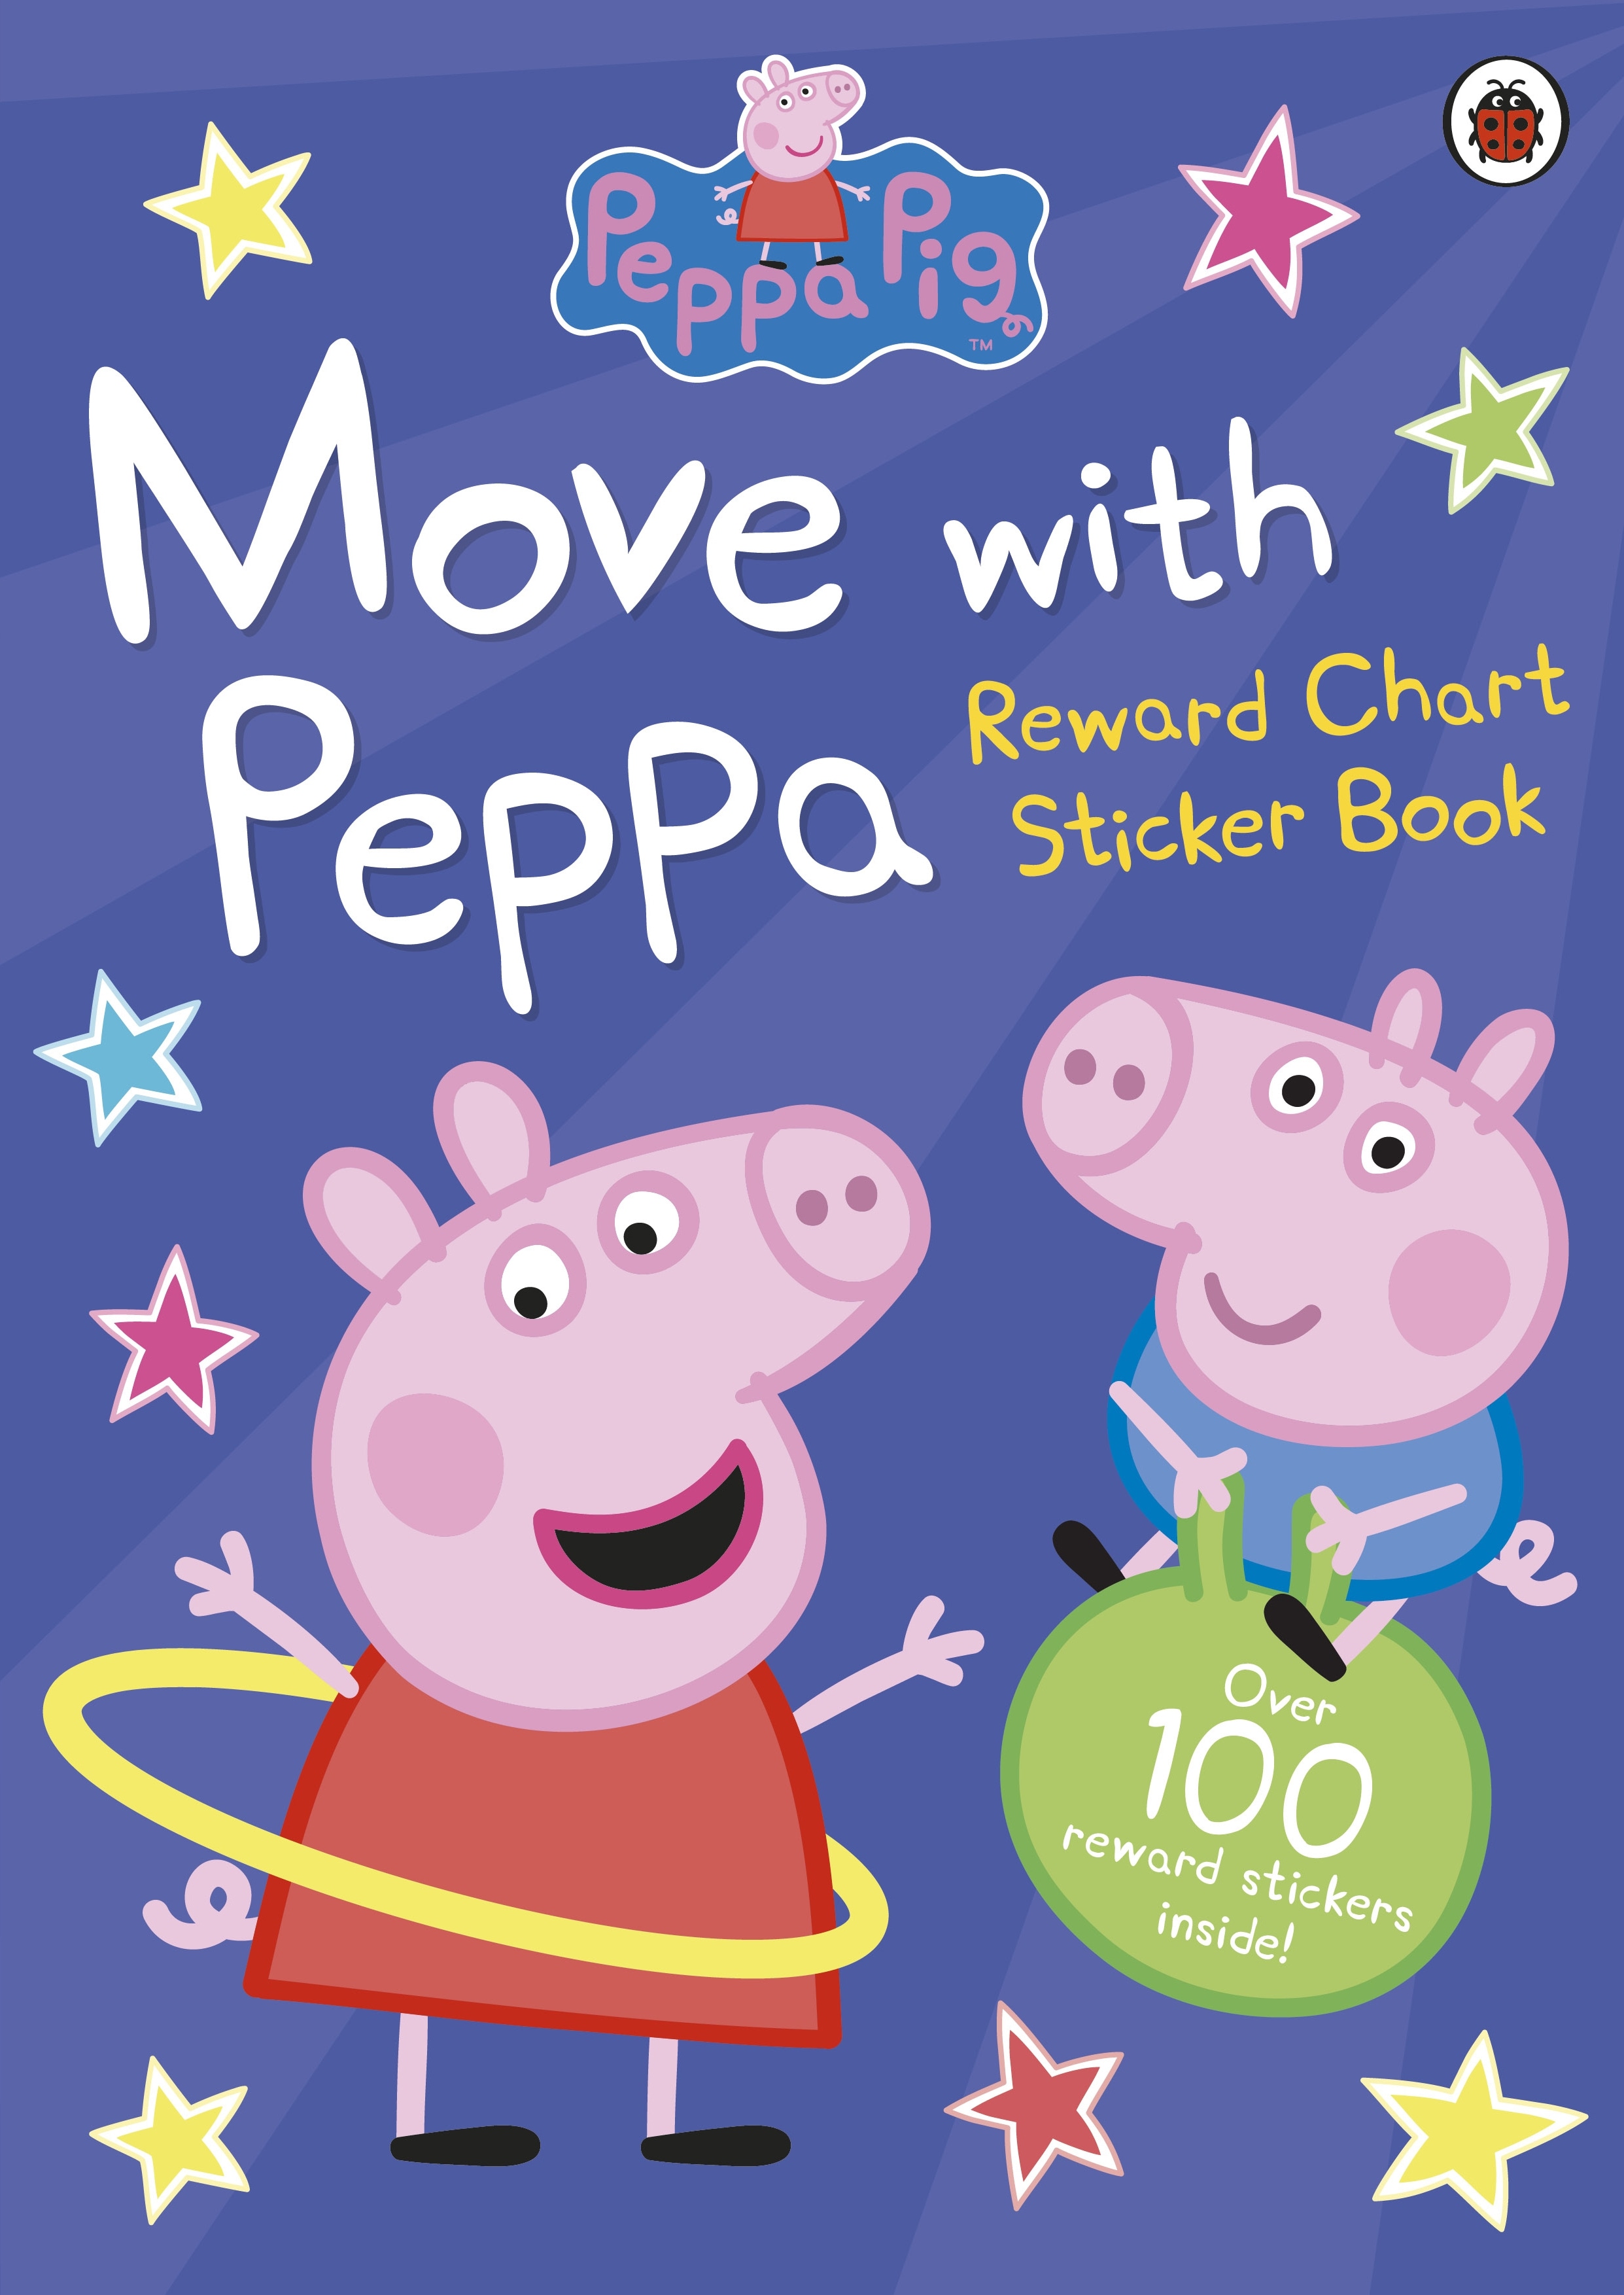 Book “Peppa Pig: Move with Peppa” by Peppa Pig — December 29, 2016